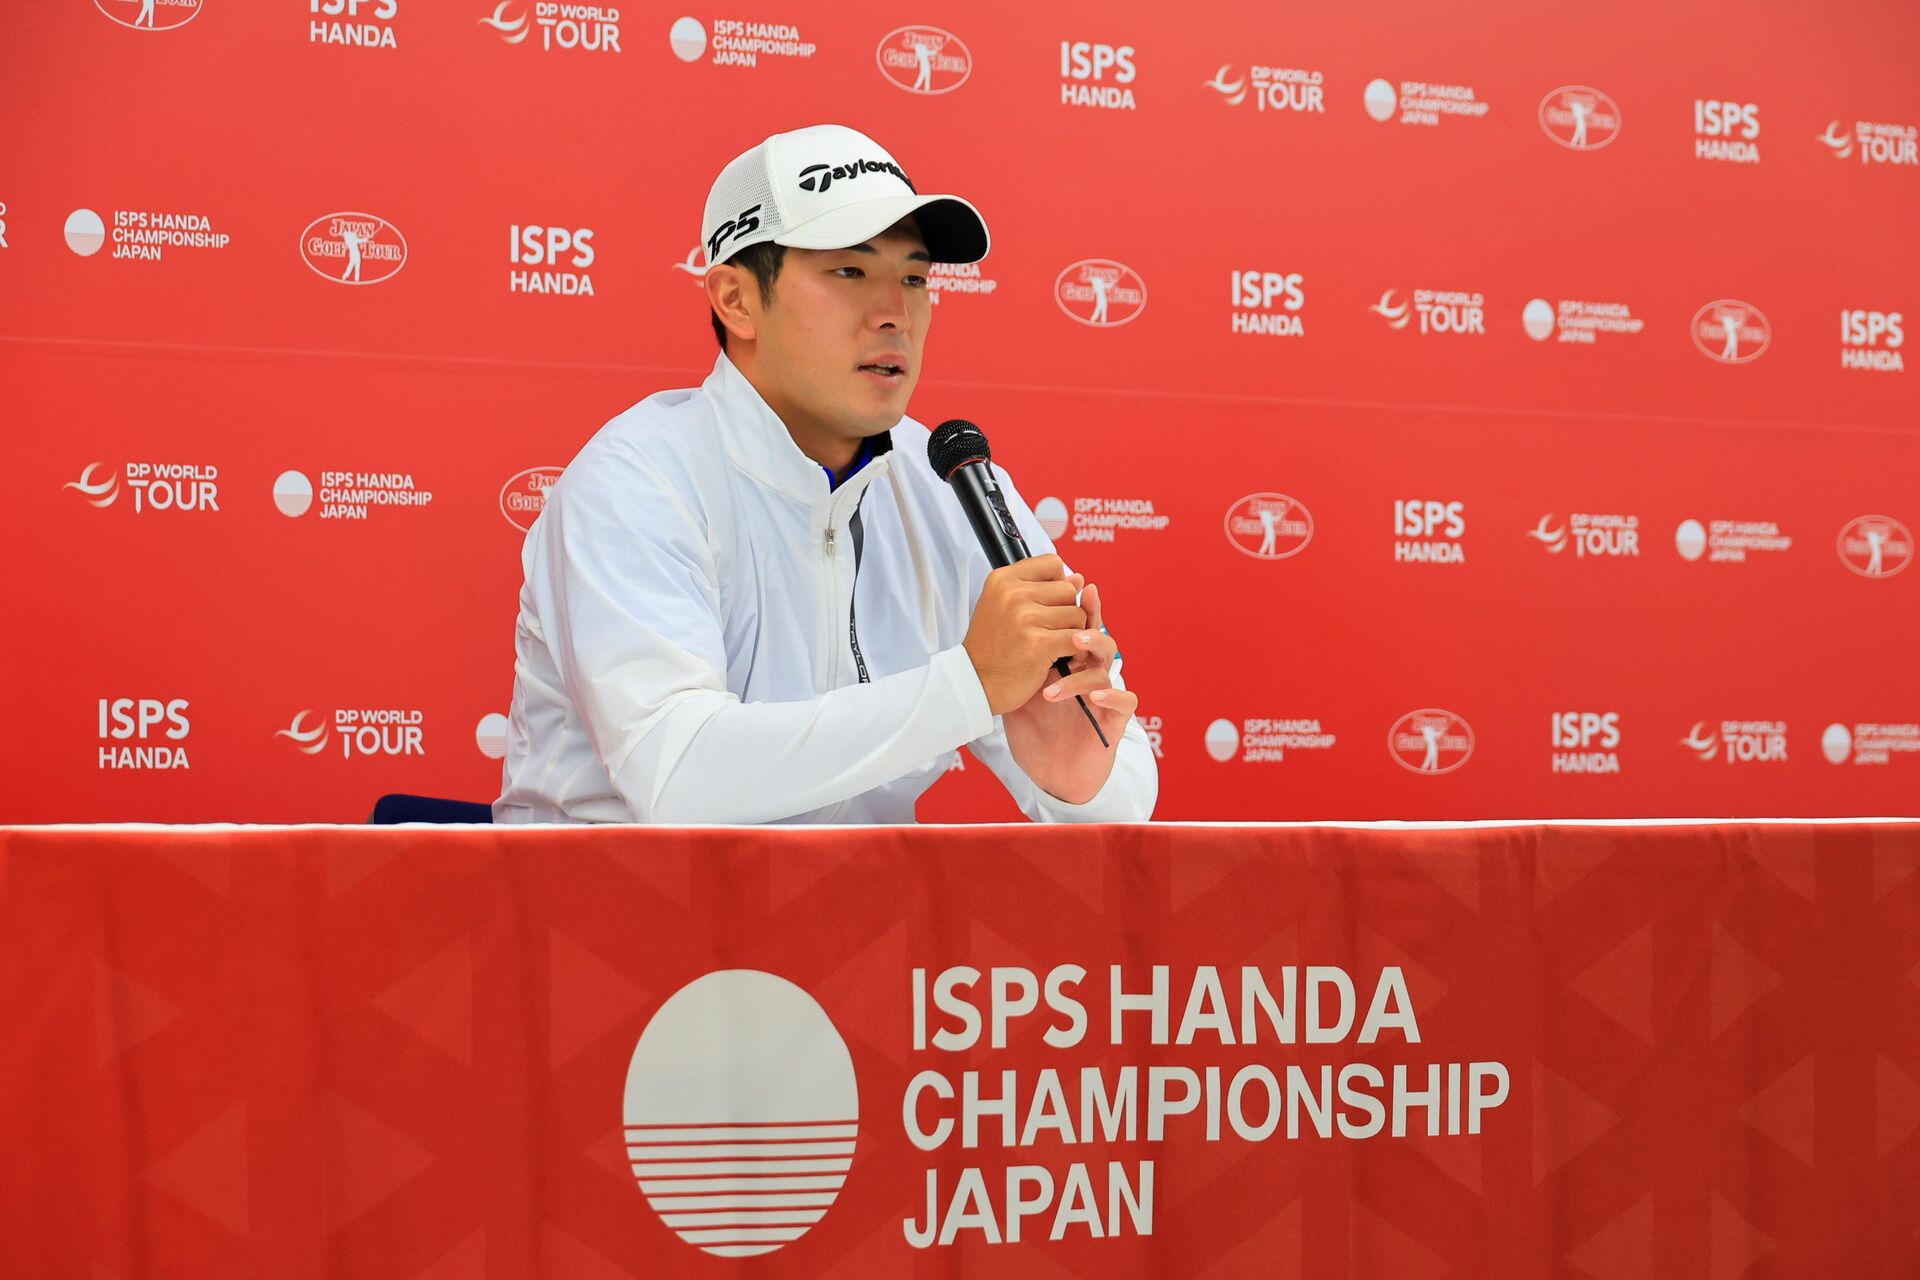 Nakajima aims to make it two on the trot